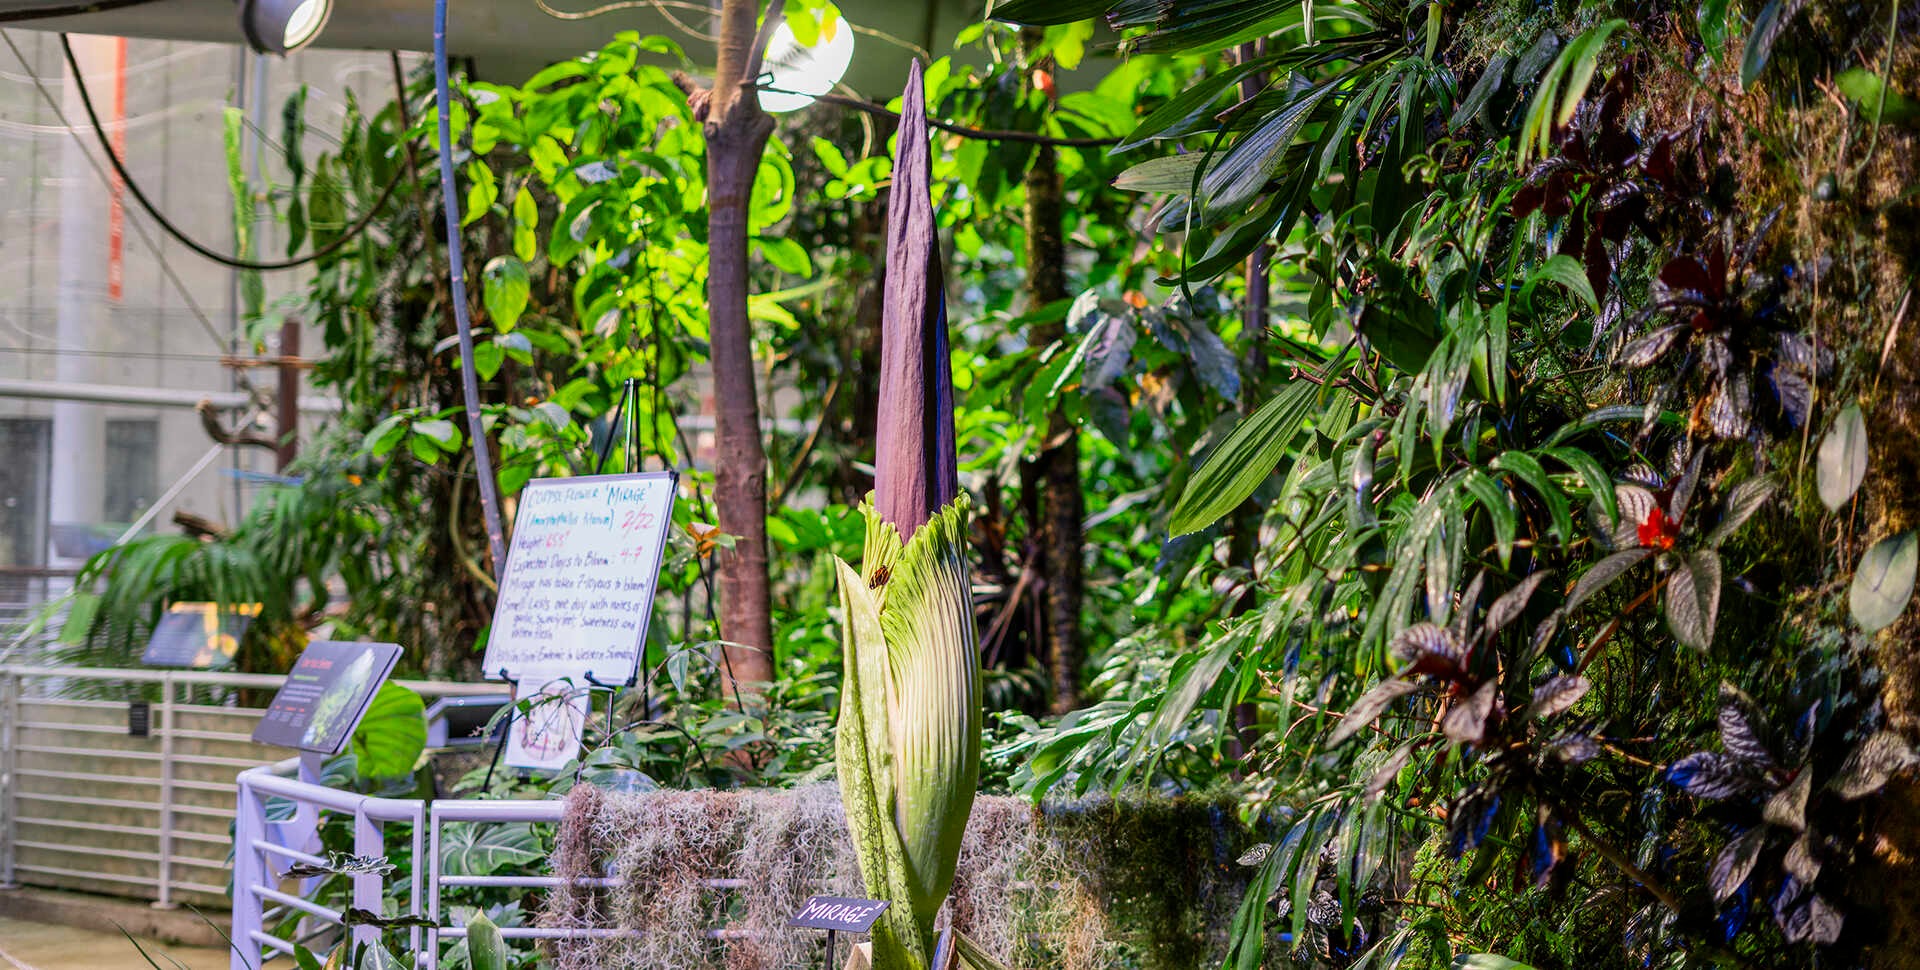  Stink Alert! A Giant Corpse Flower Is In Full Bloom In San Francisco 